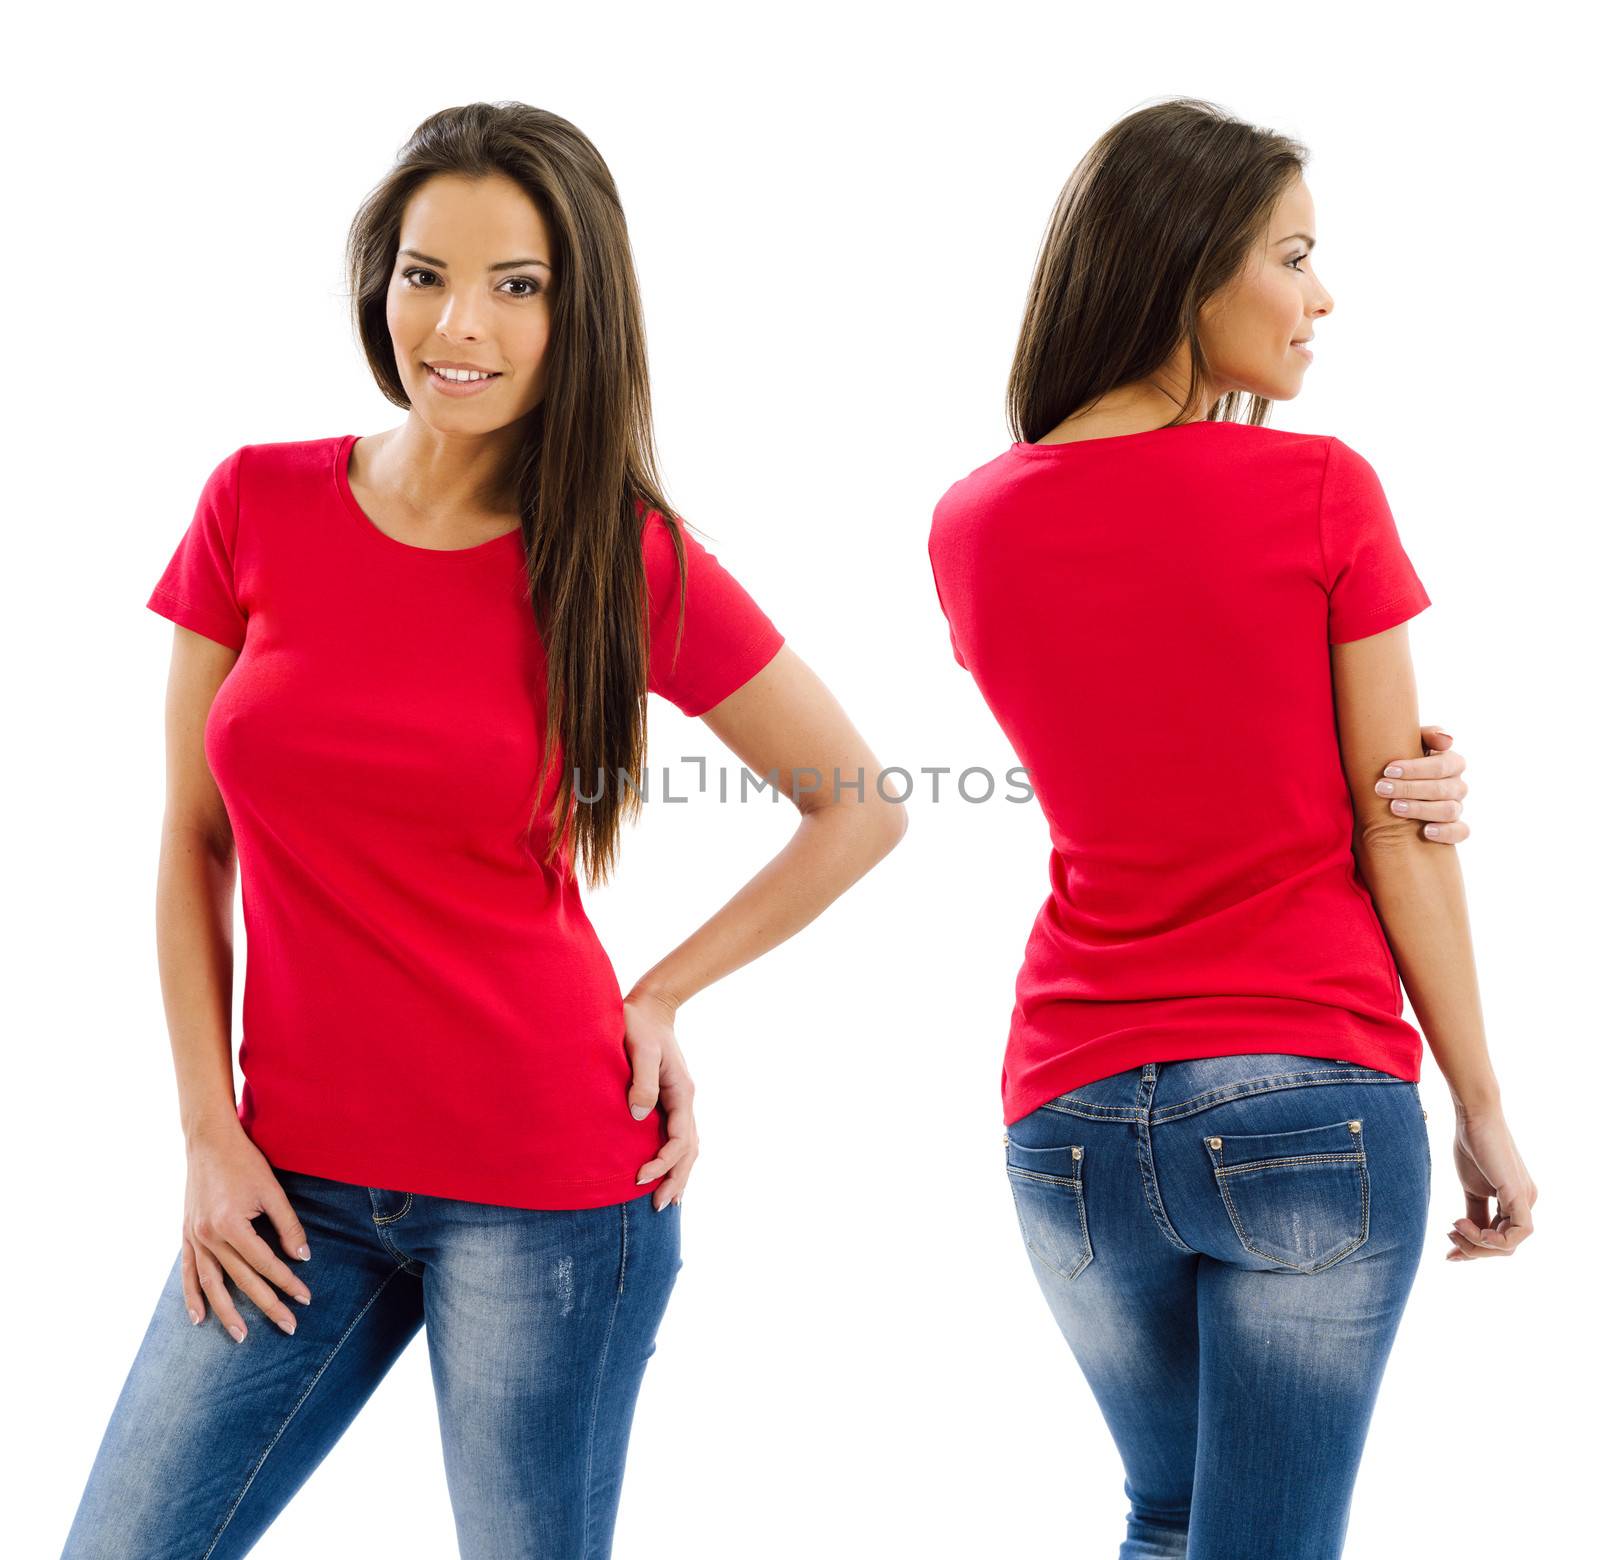 Sexy woman posing with blank red shirt by sumners